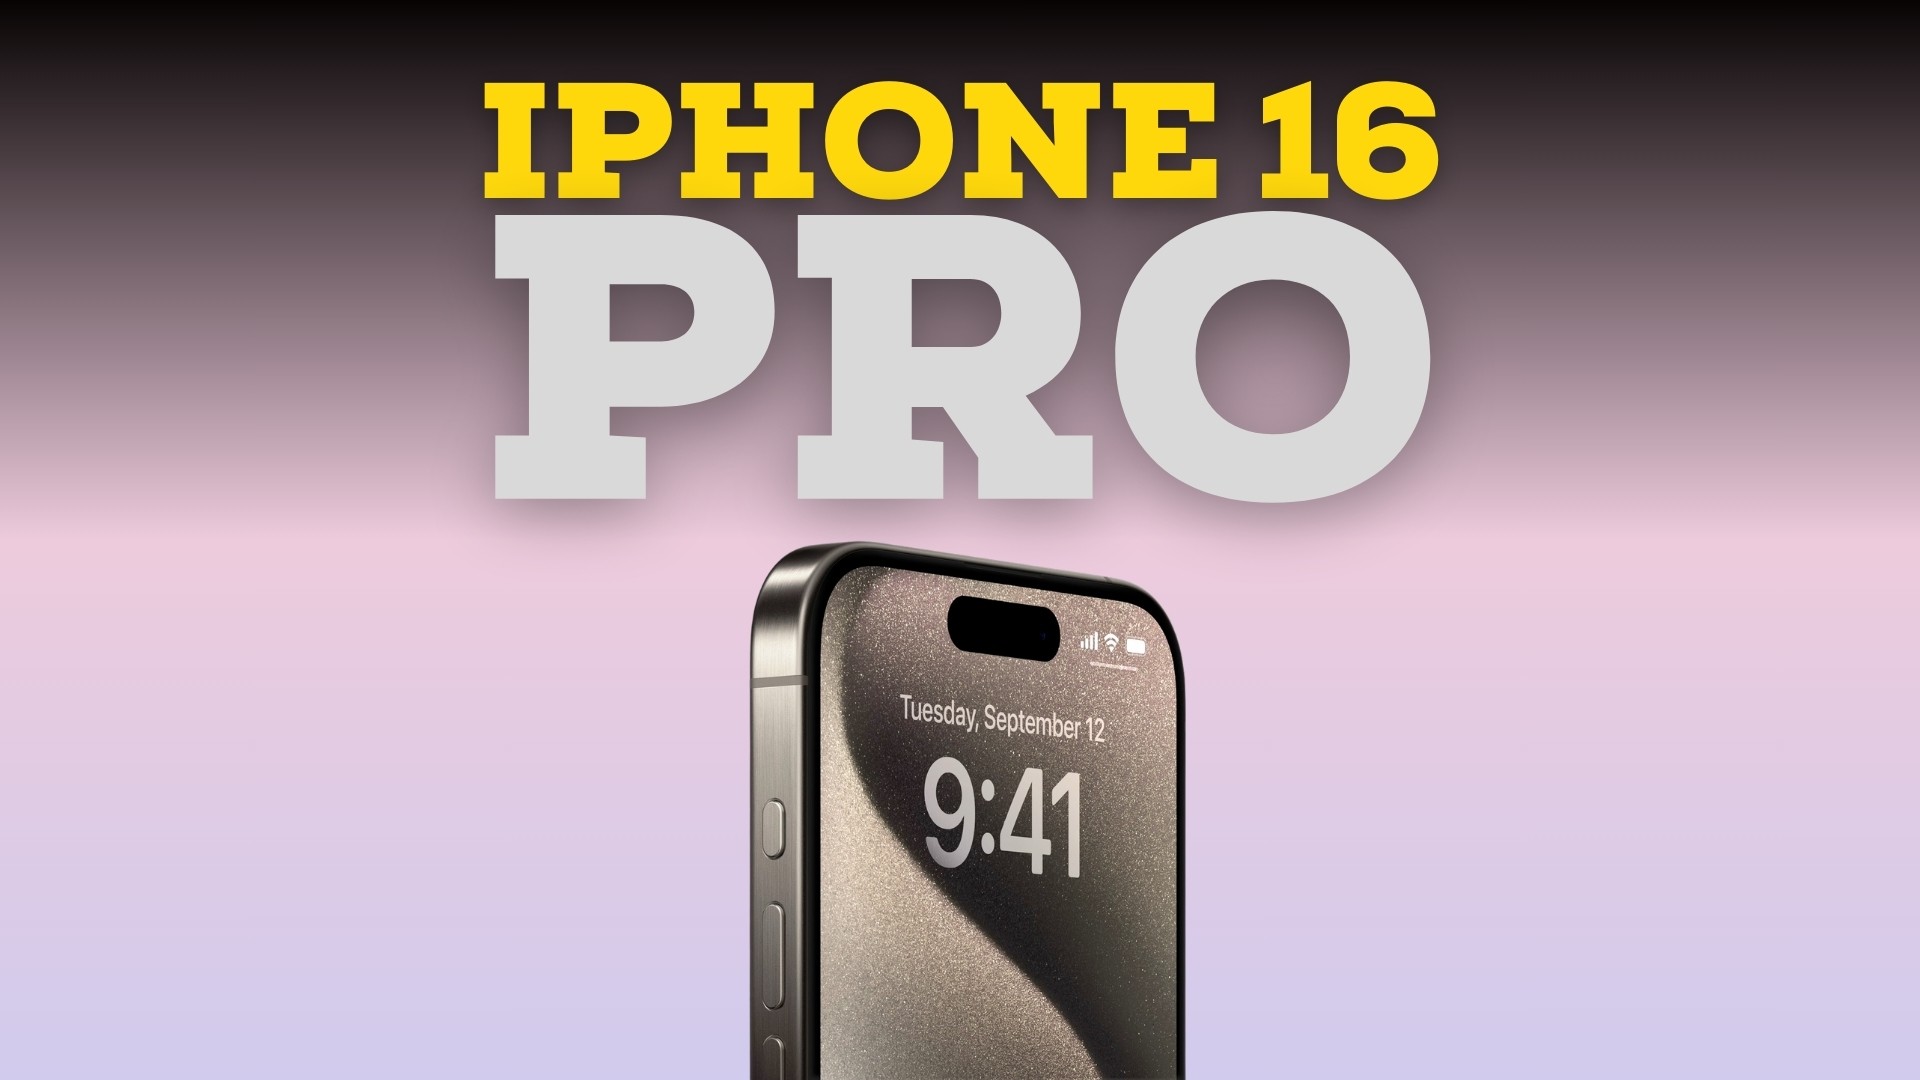 iPhone 16 Pro/ iPhone 16 Pro Max will be pink.